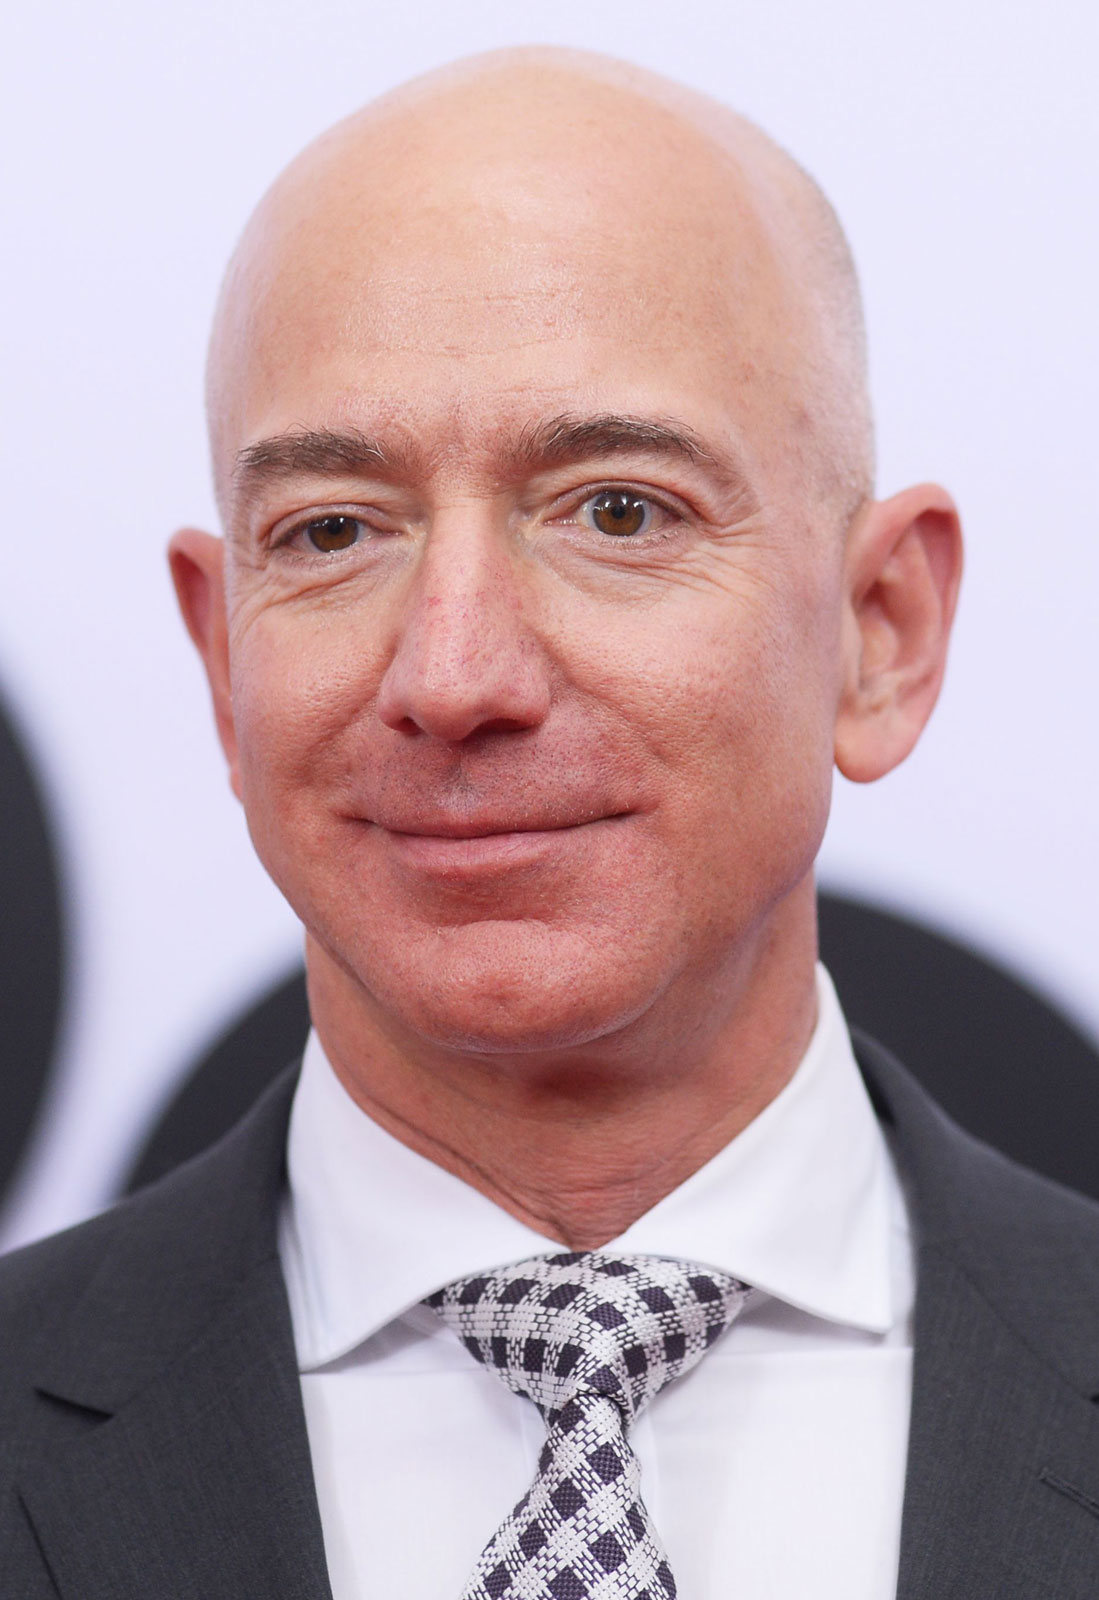 Jeff Bezos loses N492.9bn 24 hours before space expedition Angel